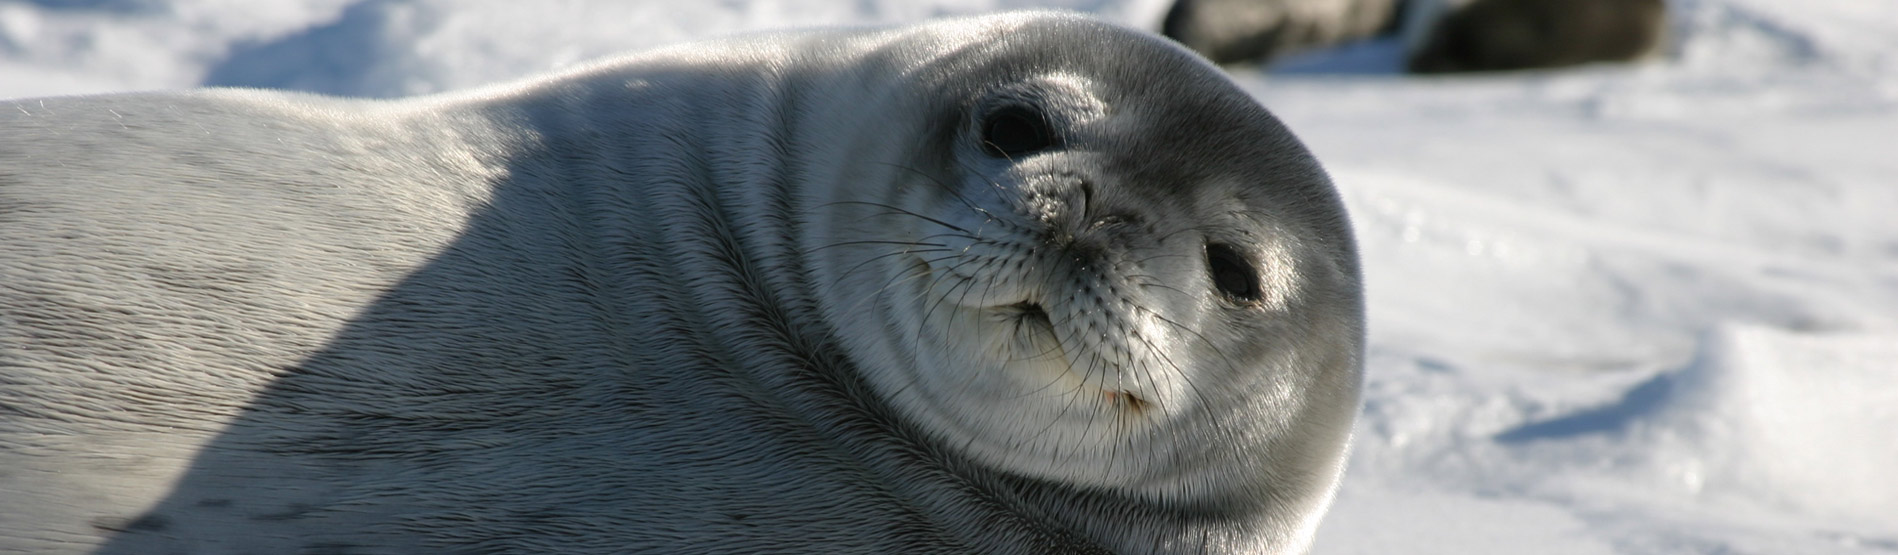 Image of a Seal